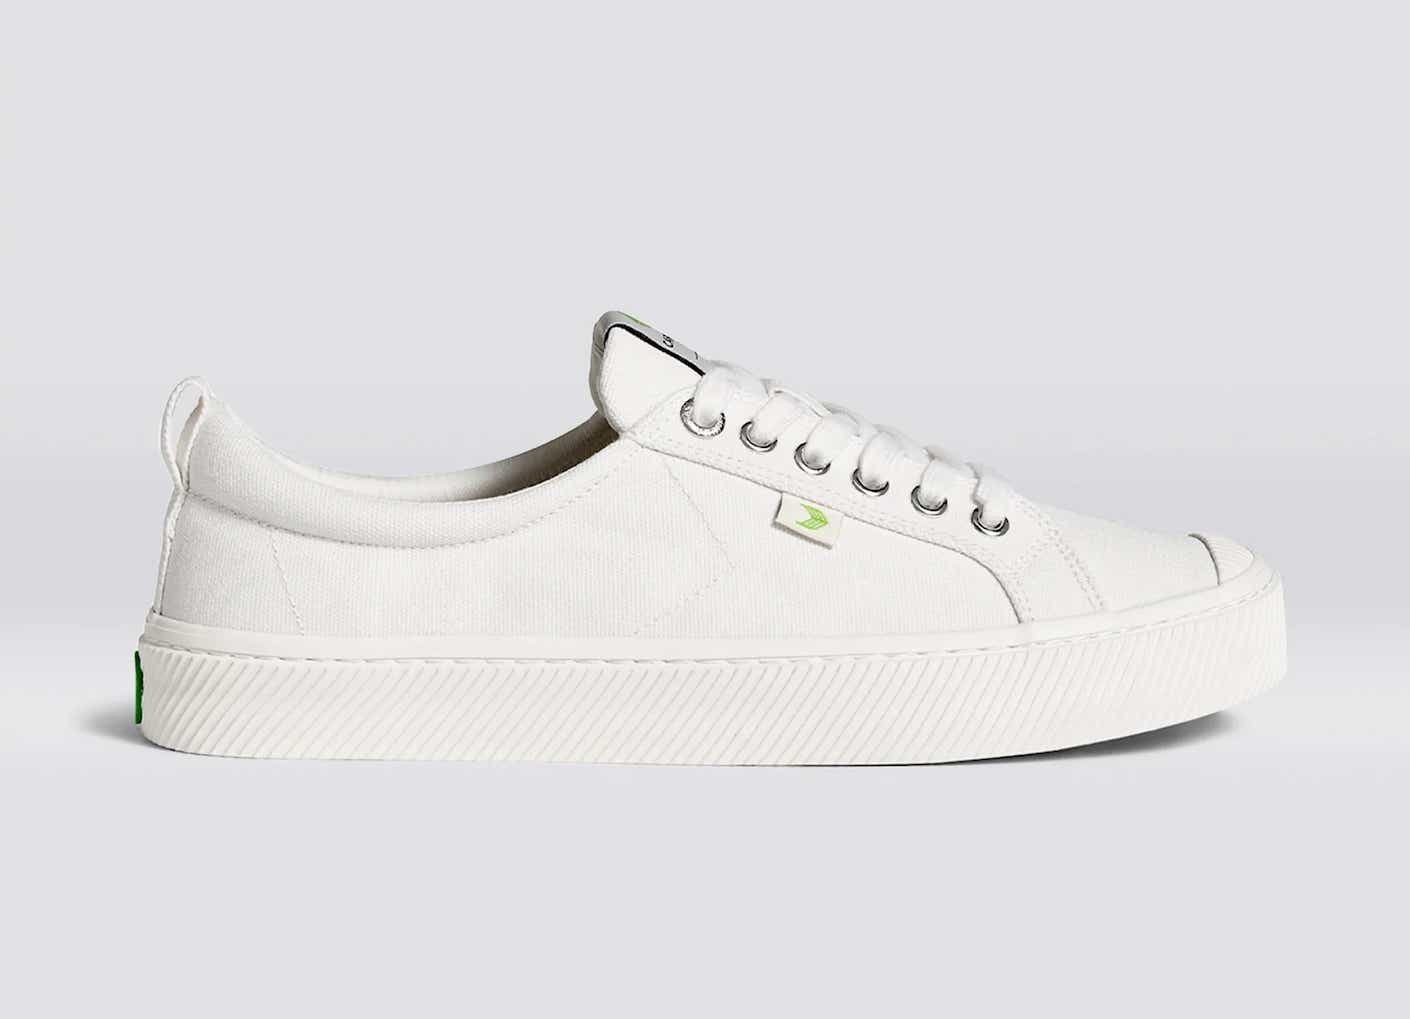 A pair of stark, white, low-top sneakers pictured in front of a white background.